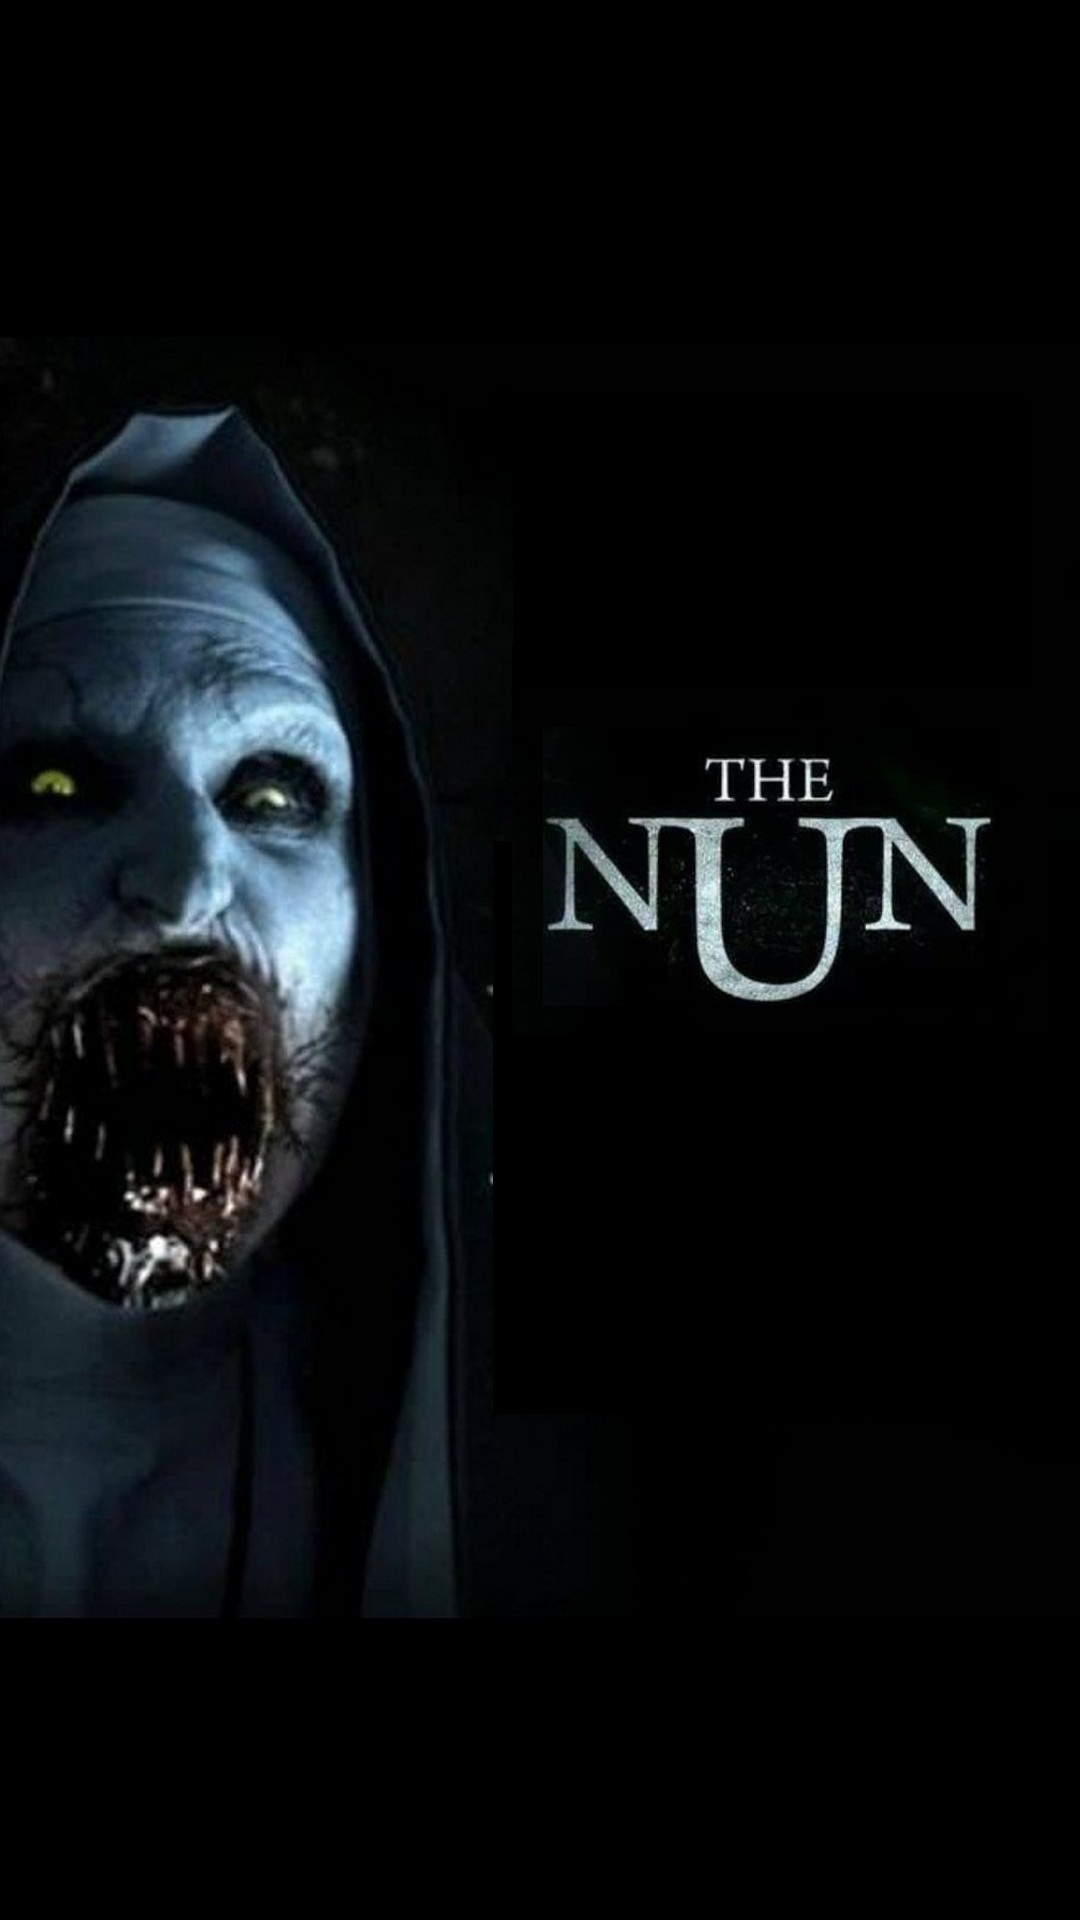 The Nun Poster Wallpaper For iPhone with image resolution 1080x1920 pixel. You can make this wallpaper for your iPhone 5, 6, 7, 8, X backgrounds, Mobile Screensaver, or iPad Lock Screen